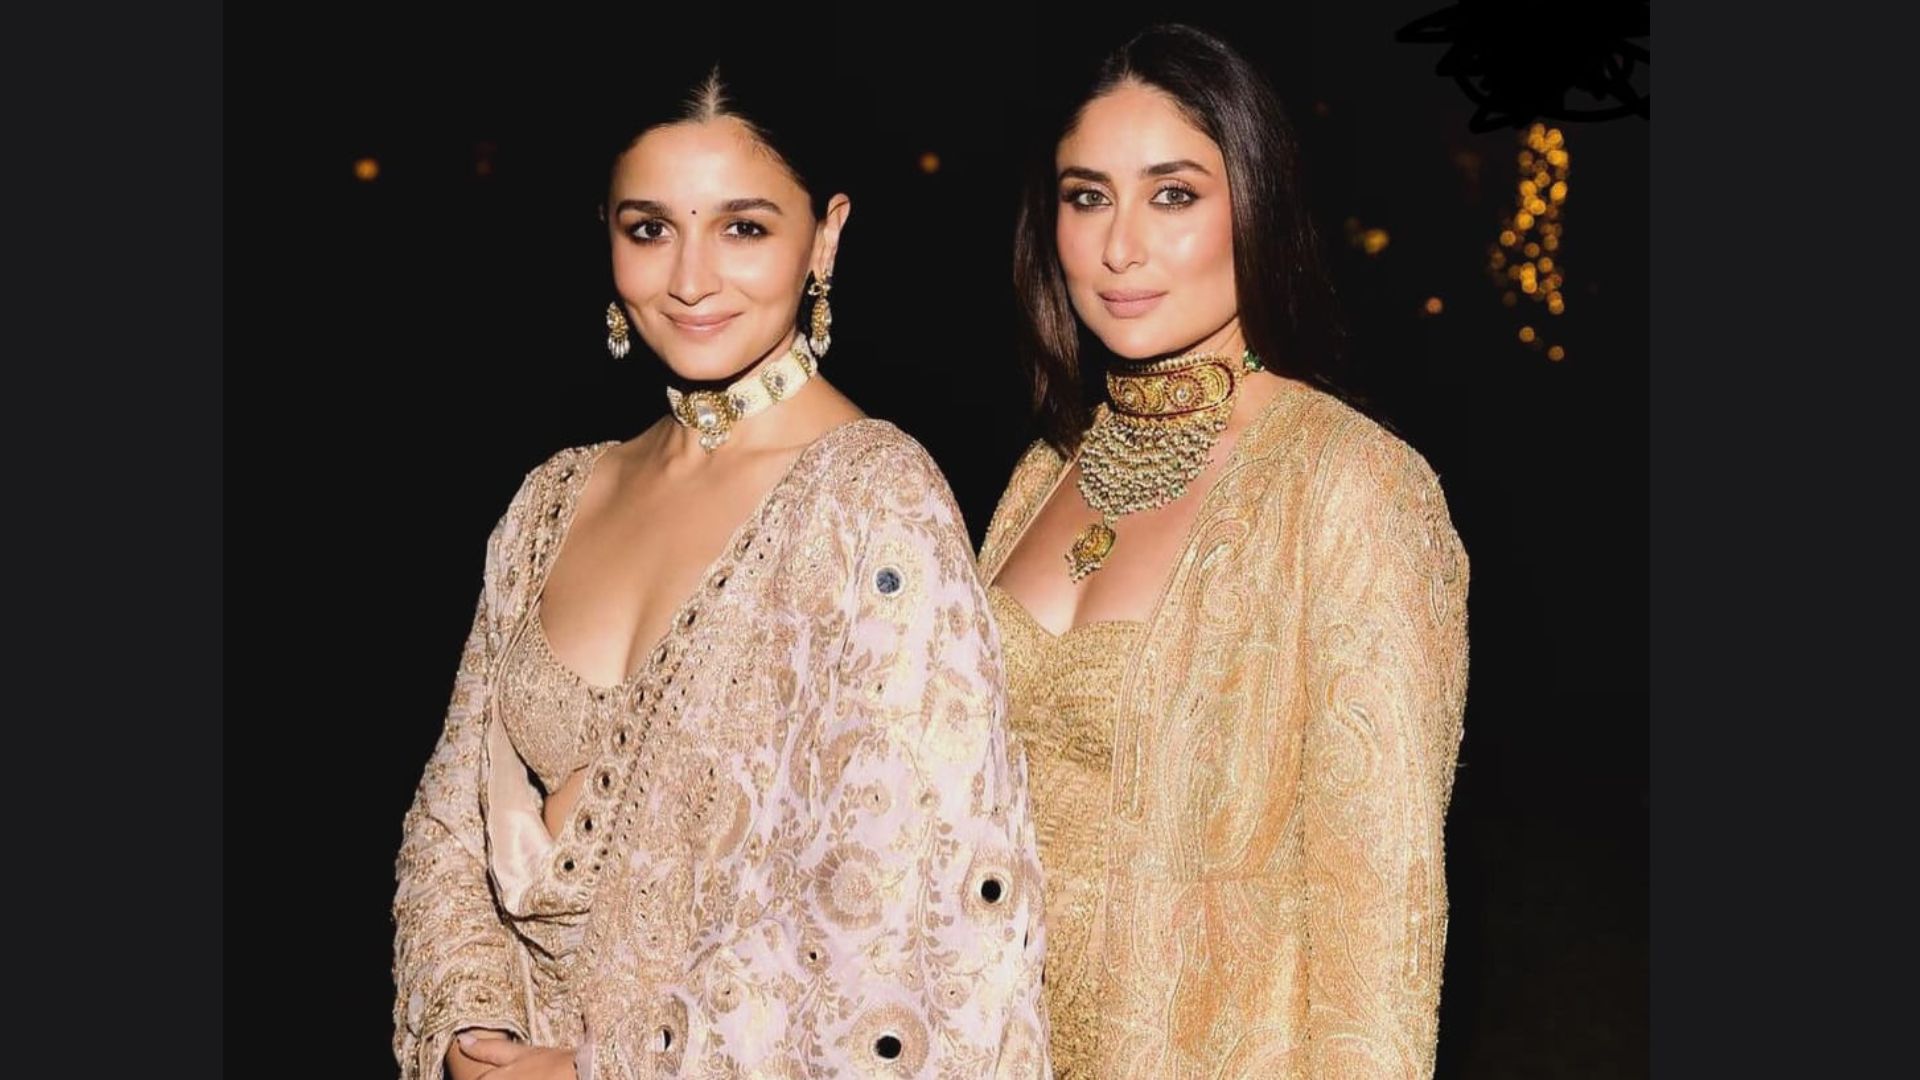 Kareena posted her picture with Alia, fans enamored their love